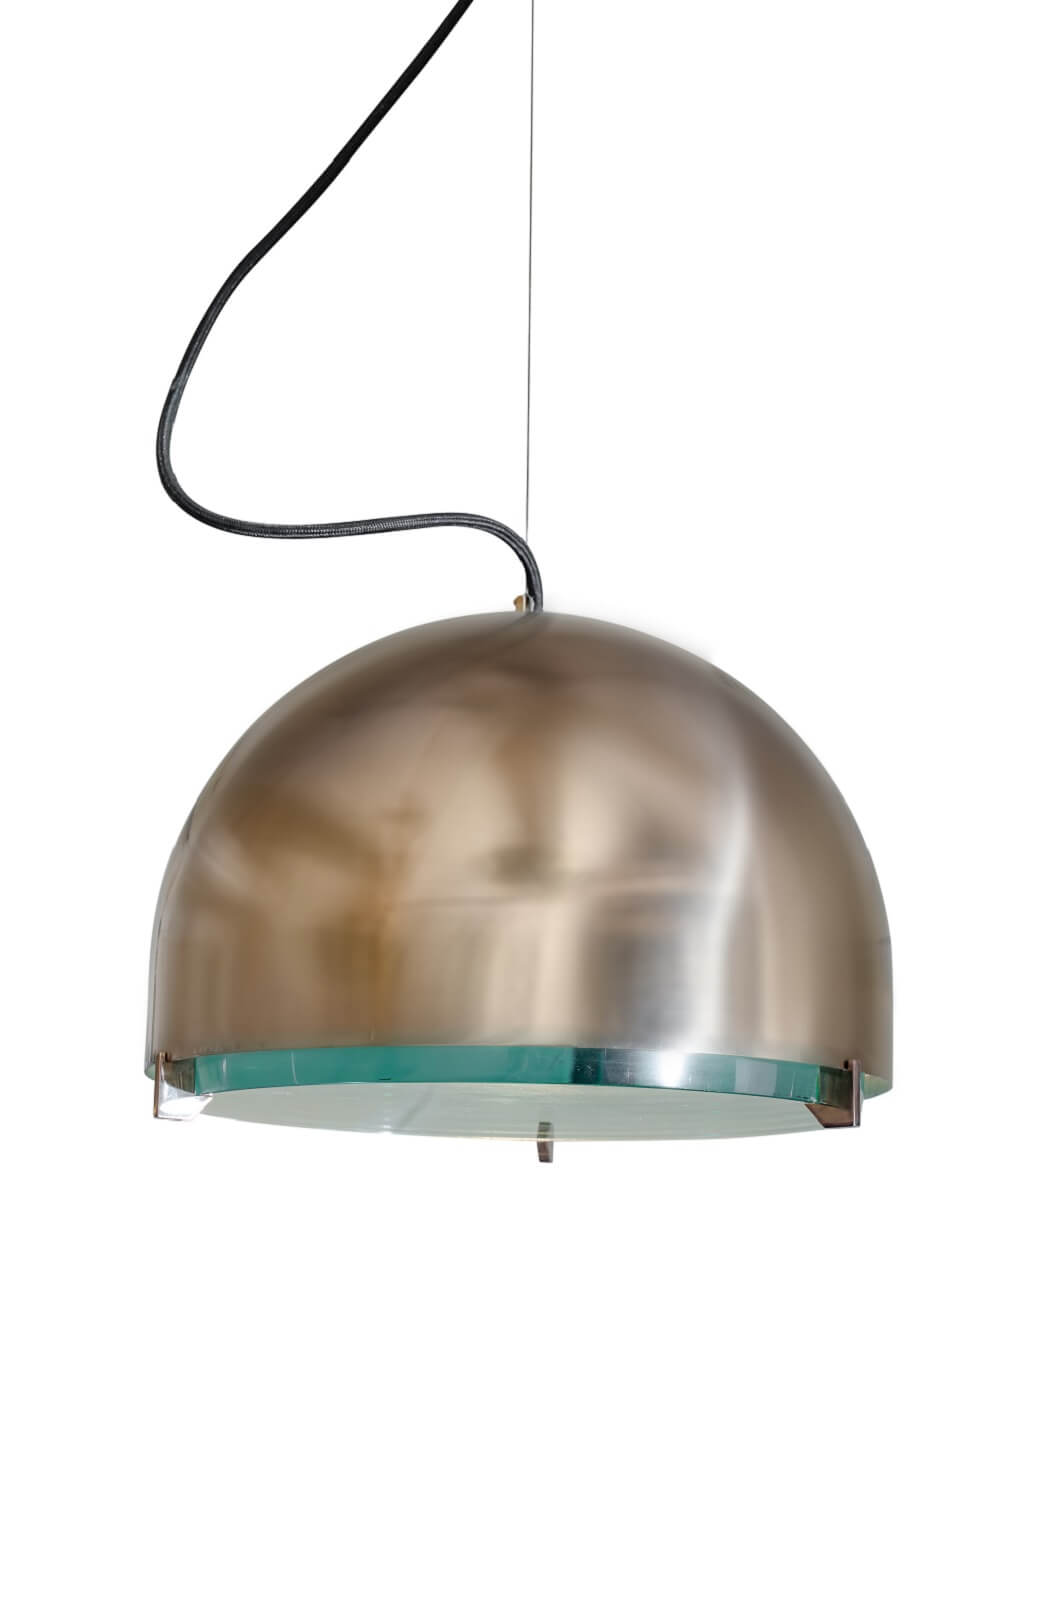 Ceiling lamp mod. 2409 by Max Ingrand for sale